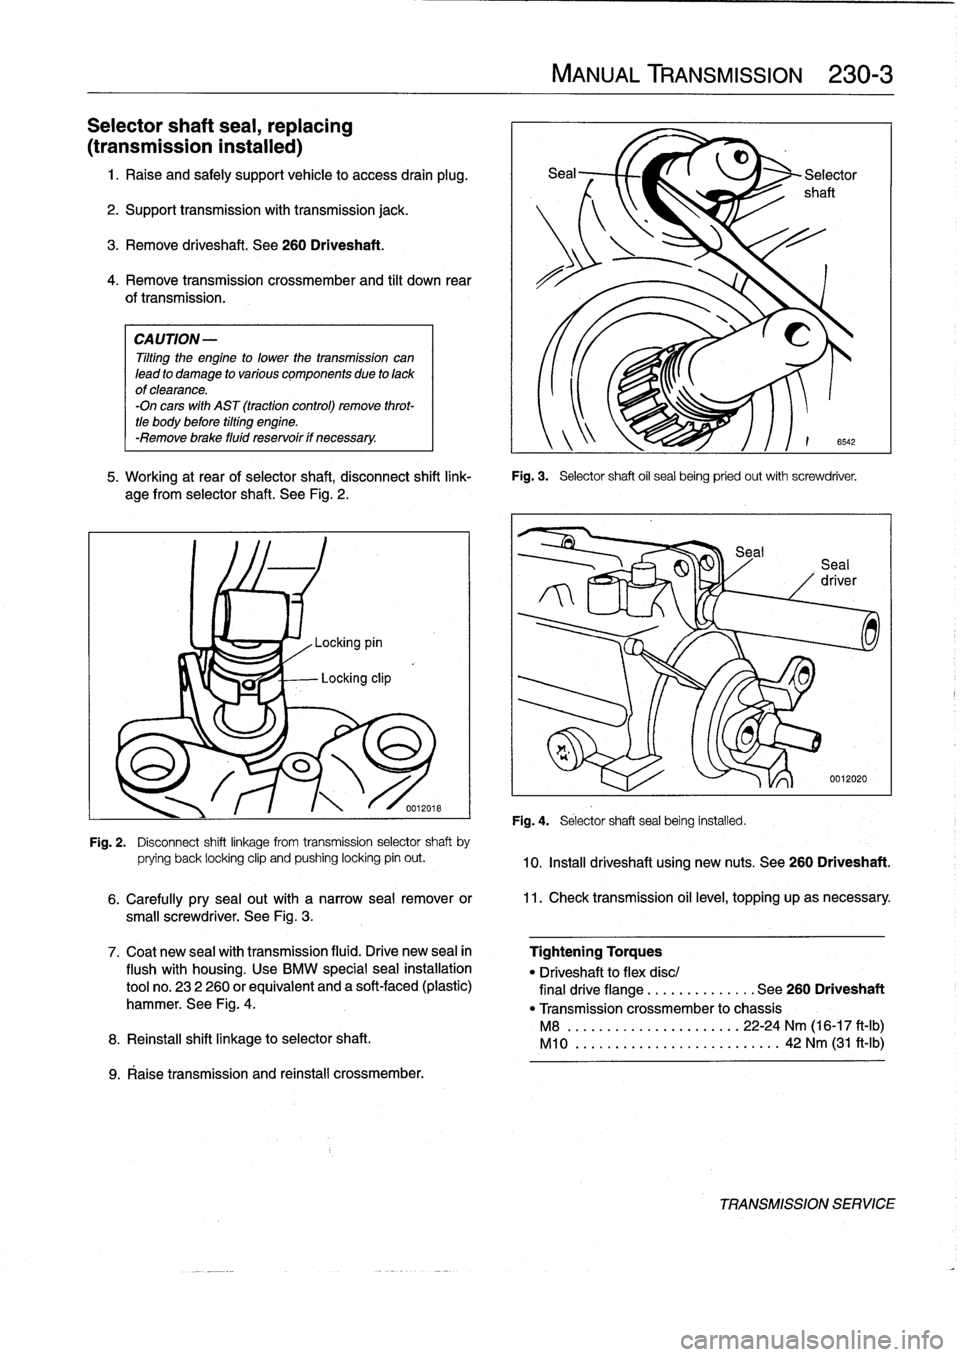 BMW 328i 1995 E36 Workshop Manual 
Selector
shaft
seal,
replacing

(transmission
instalied)

1
.
Raise
and
safely
support
vehicle
to
access
drain
plug
.

2
.
Support
transmission
with
transmission
jack
.

3
.
Remove
driveshaft
.
See
2